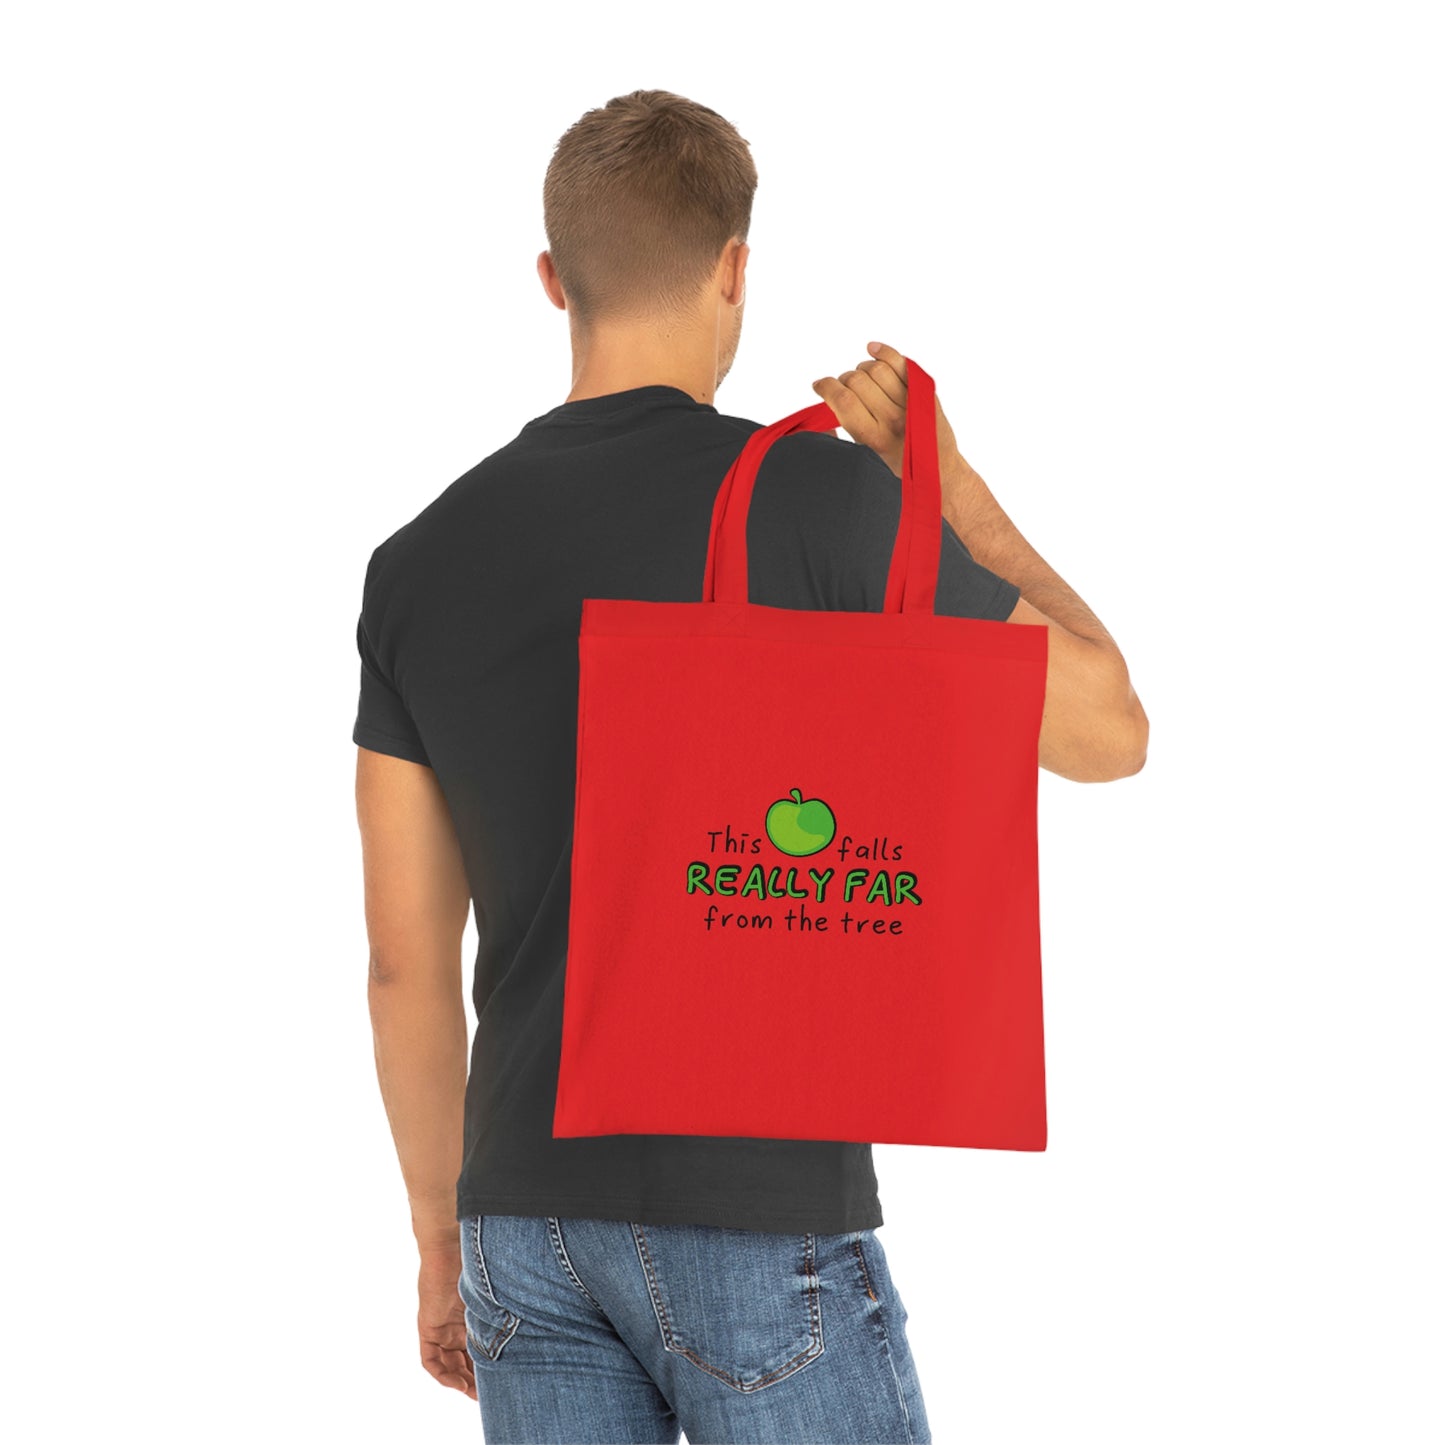 Weirdo | If you are looking for some weird, funny shopping bags, hashtagweirdo is the number one online shop for you! This red cotton tote bag has our funny meme written at the front of the bag.